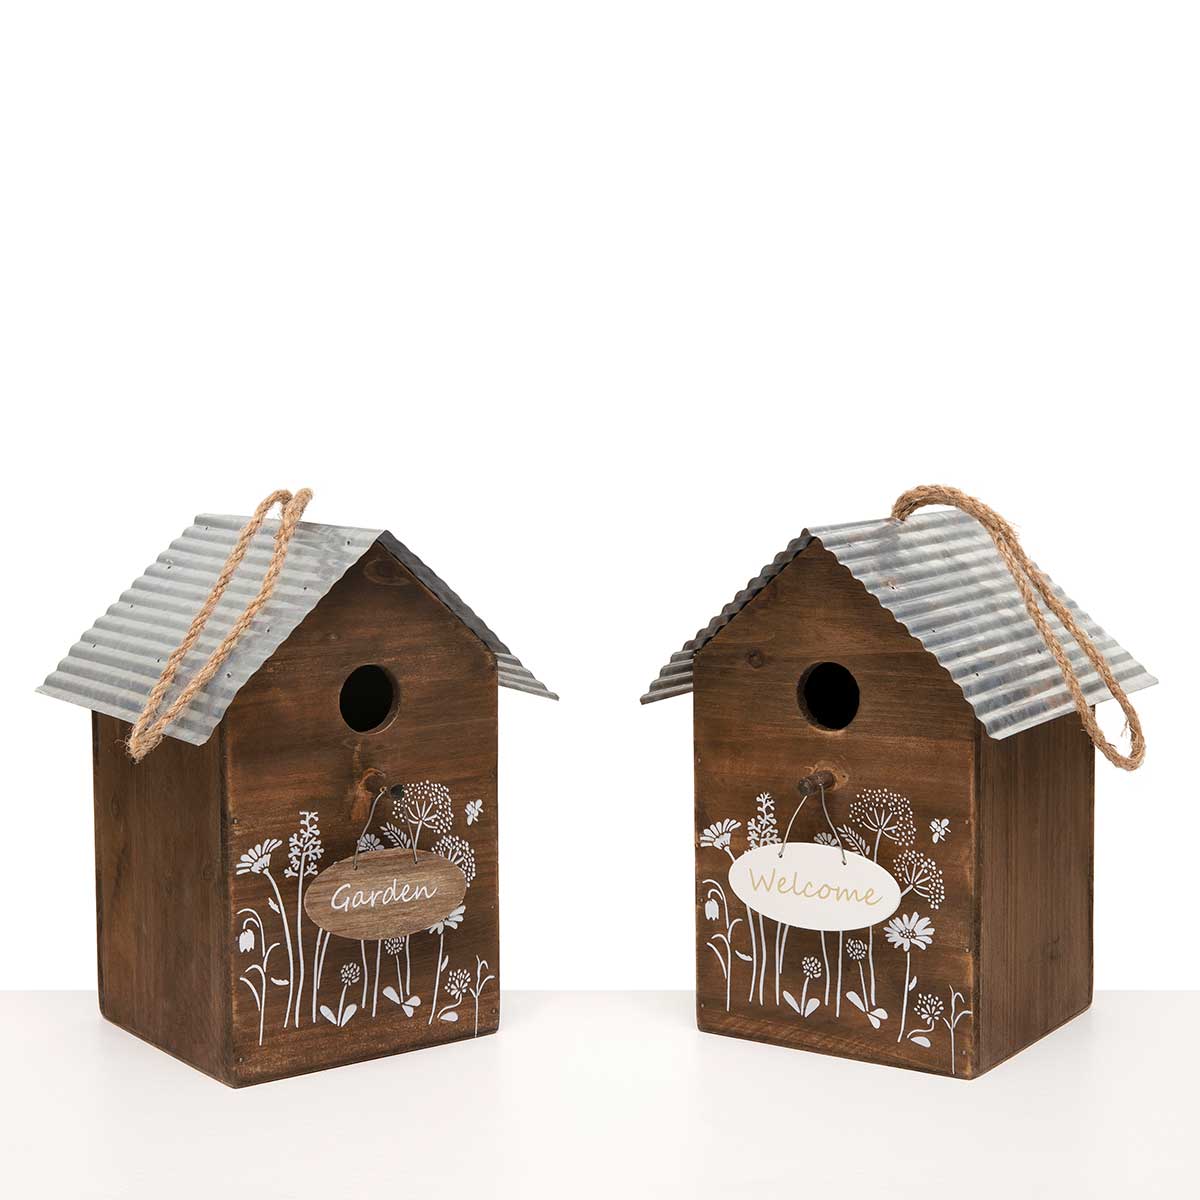 BIRD HOUSE 2 ASSORTED 7.5IN X 6.75IN X 9.5IN BR/WHITE WOOD/METAL